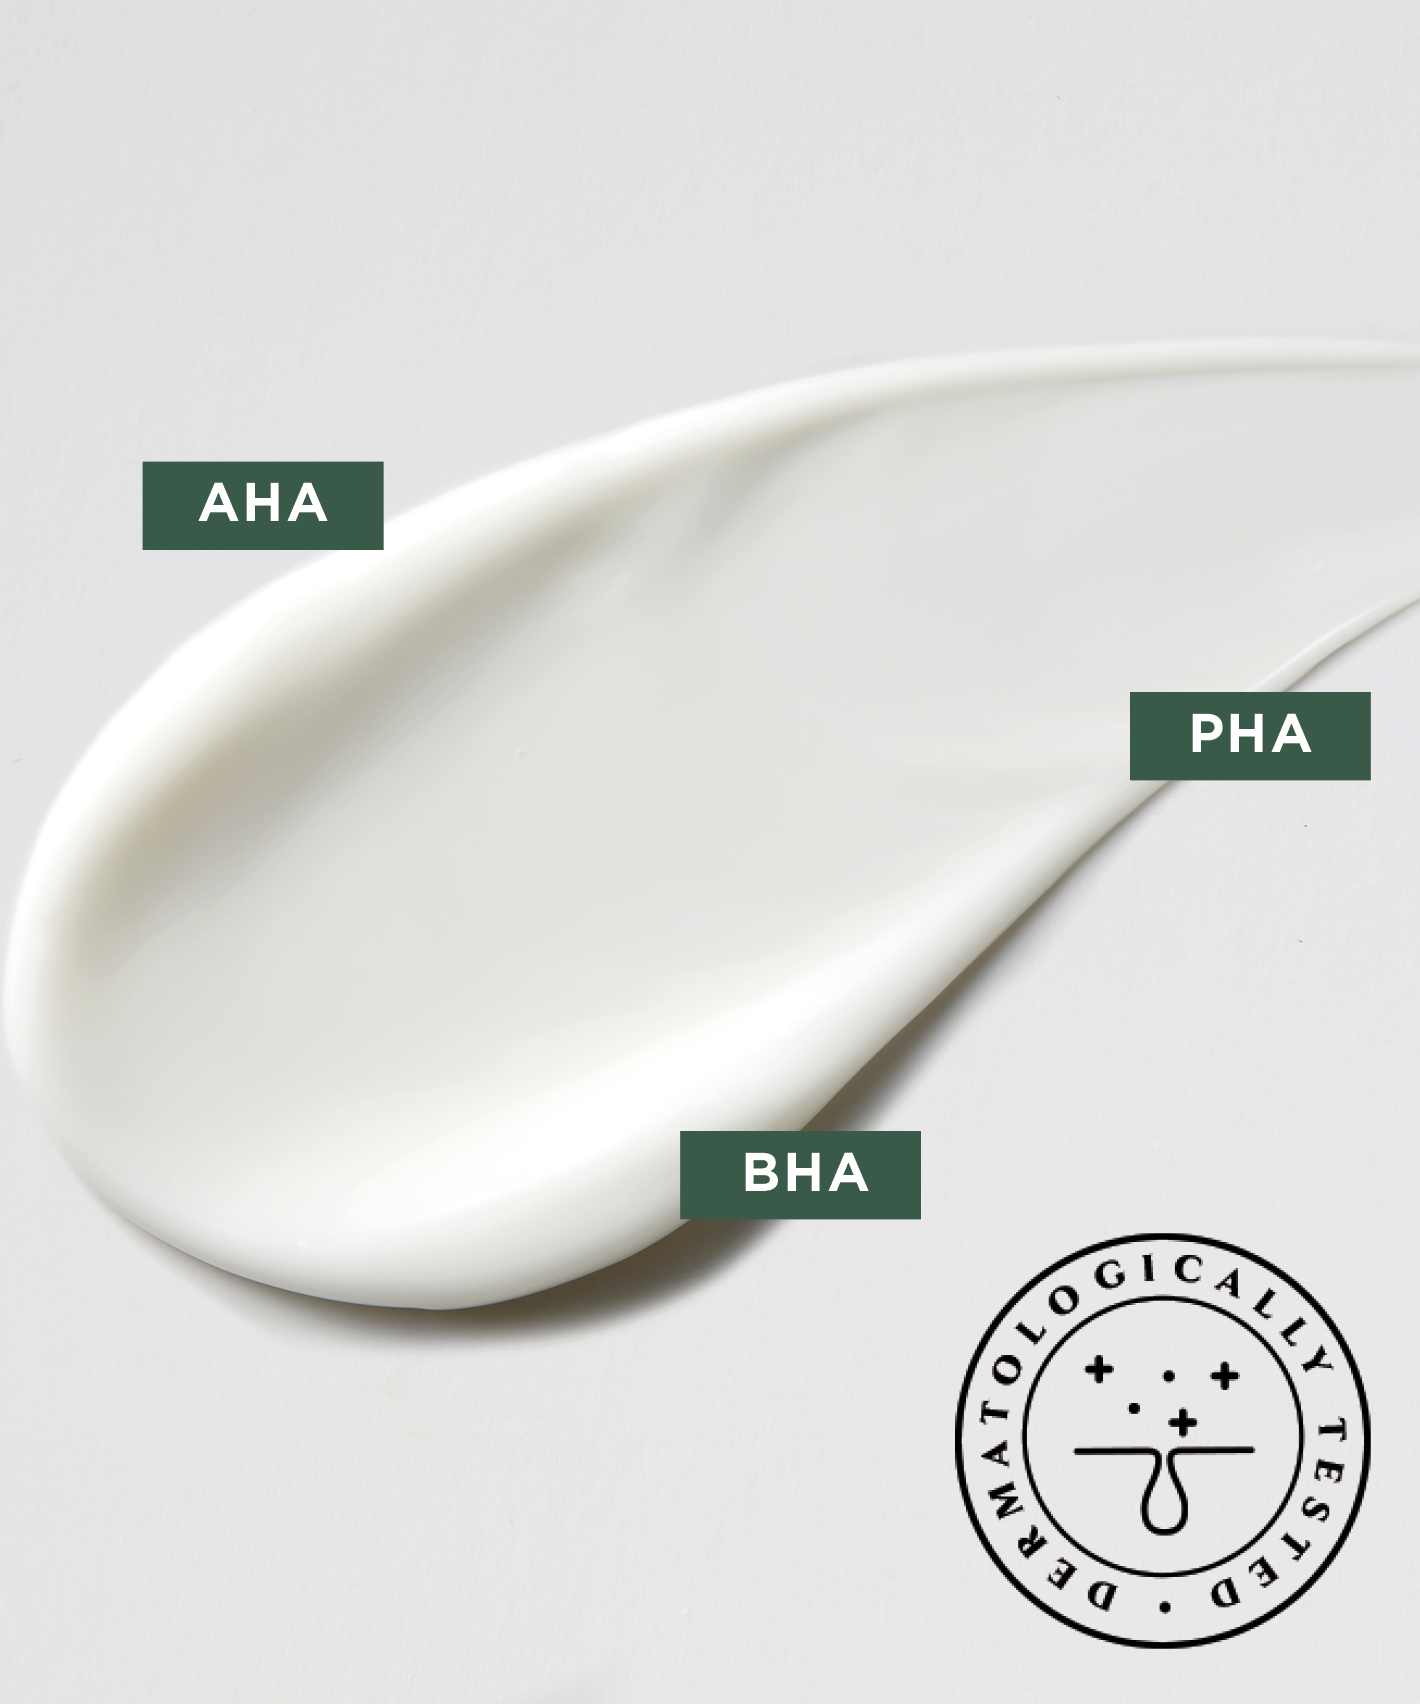 A white spread of The Face Shop Cream on a white surface with three abbreviations attached to it: AHA, PHA, BHA and a stamp saying "Dermatologically Approved"